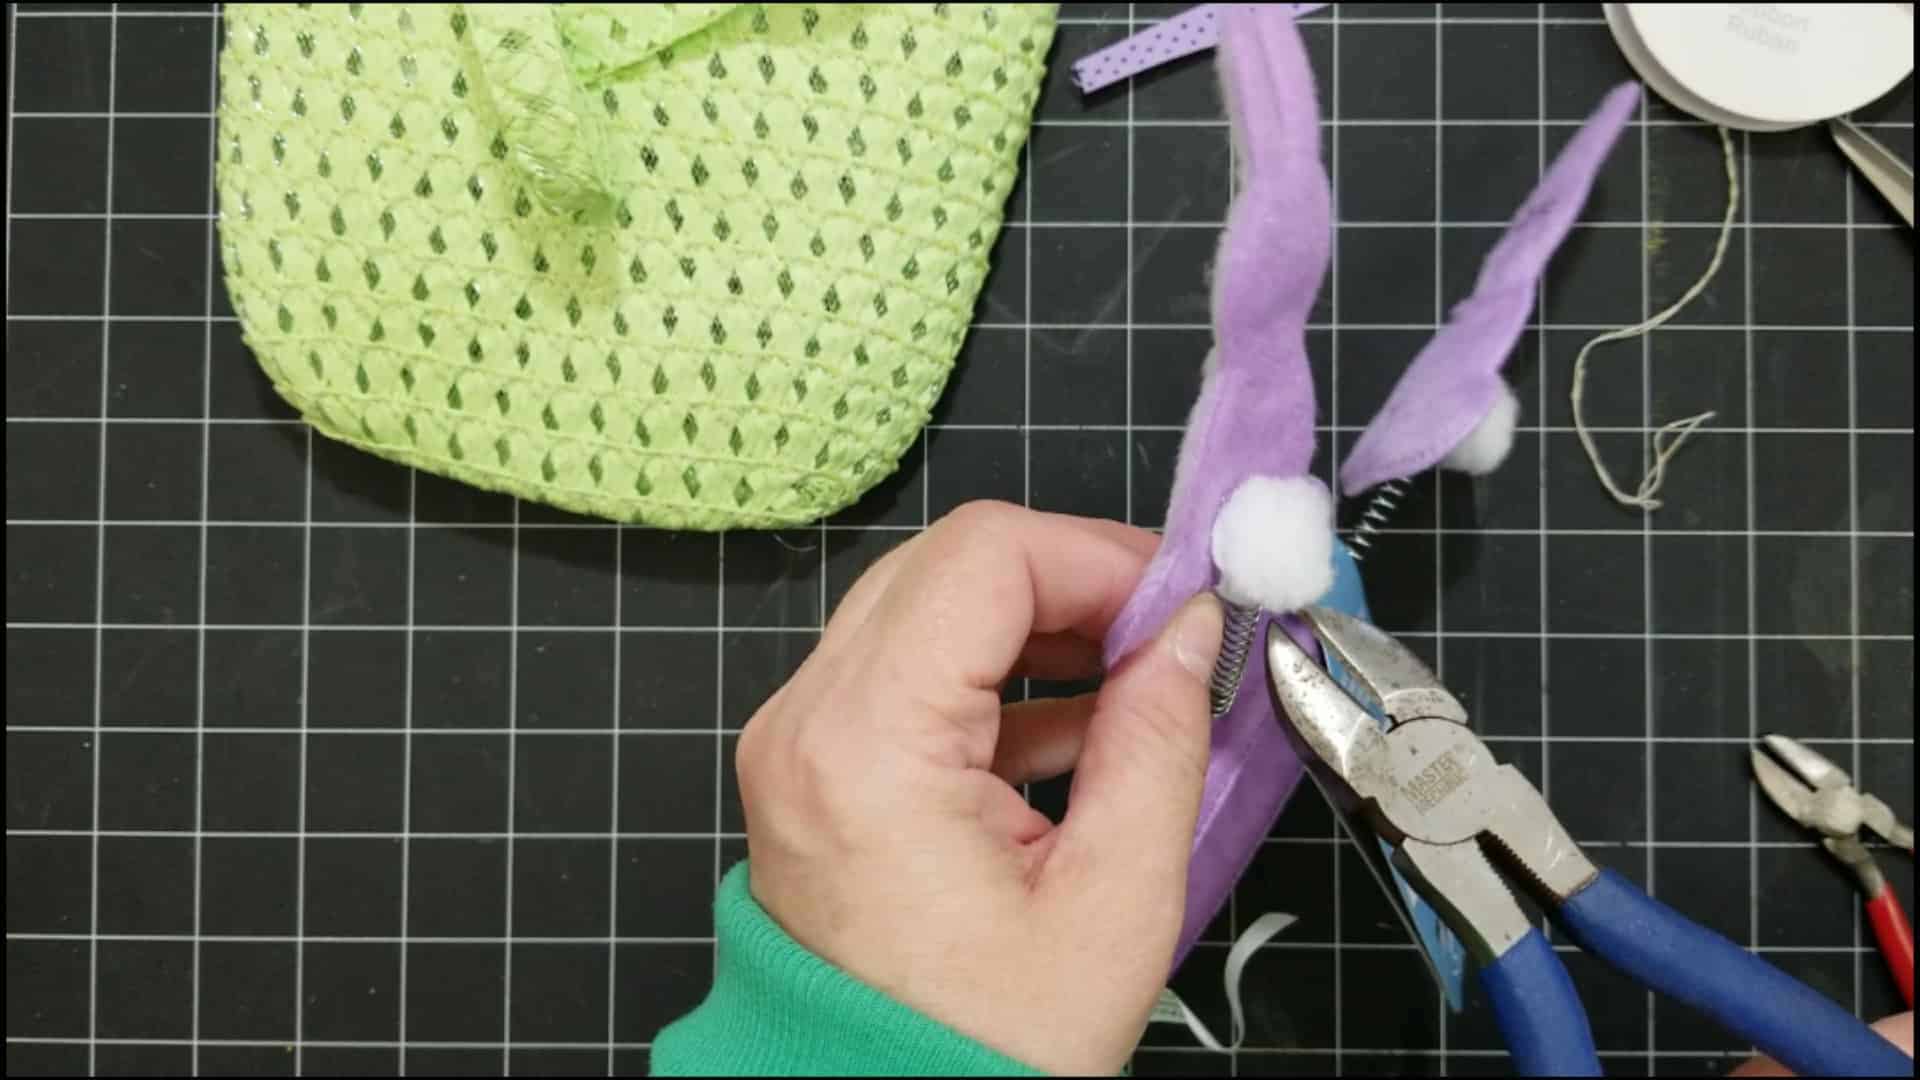 Adding hot glue to the front of the bunny.